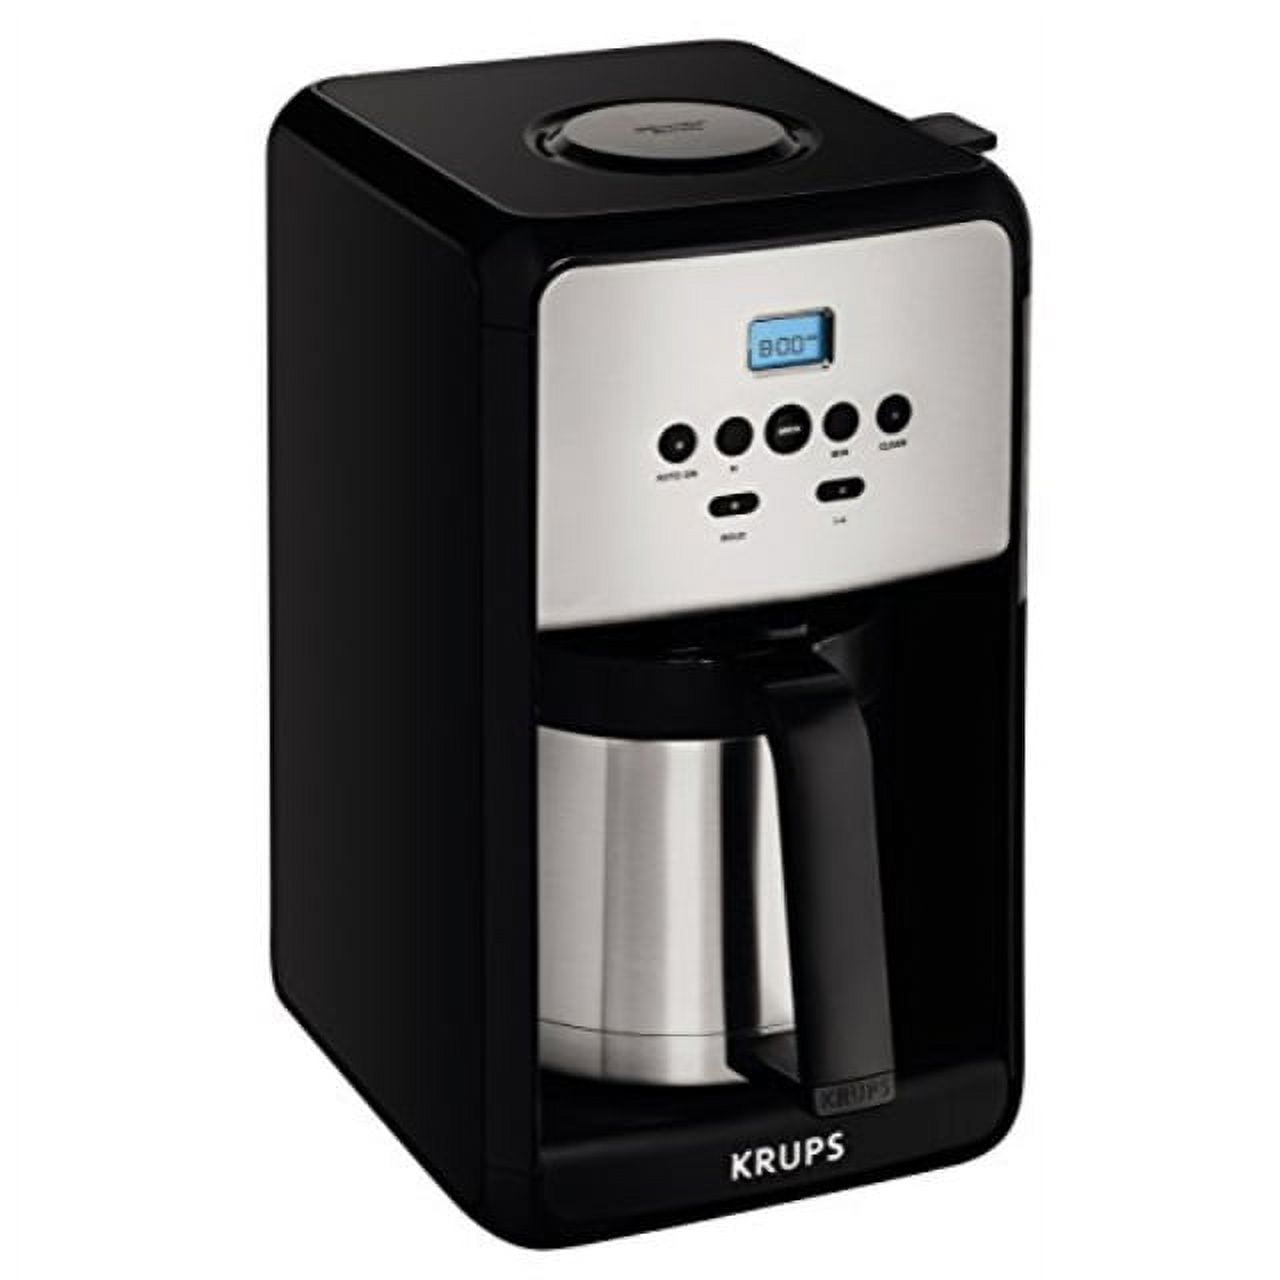 Krups 12oz Single Serve Coffee Maker with Travel Tumbler | Stainless Steel & Black, Size: 12 Fluid Ounces